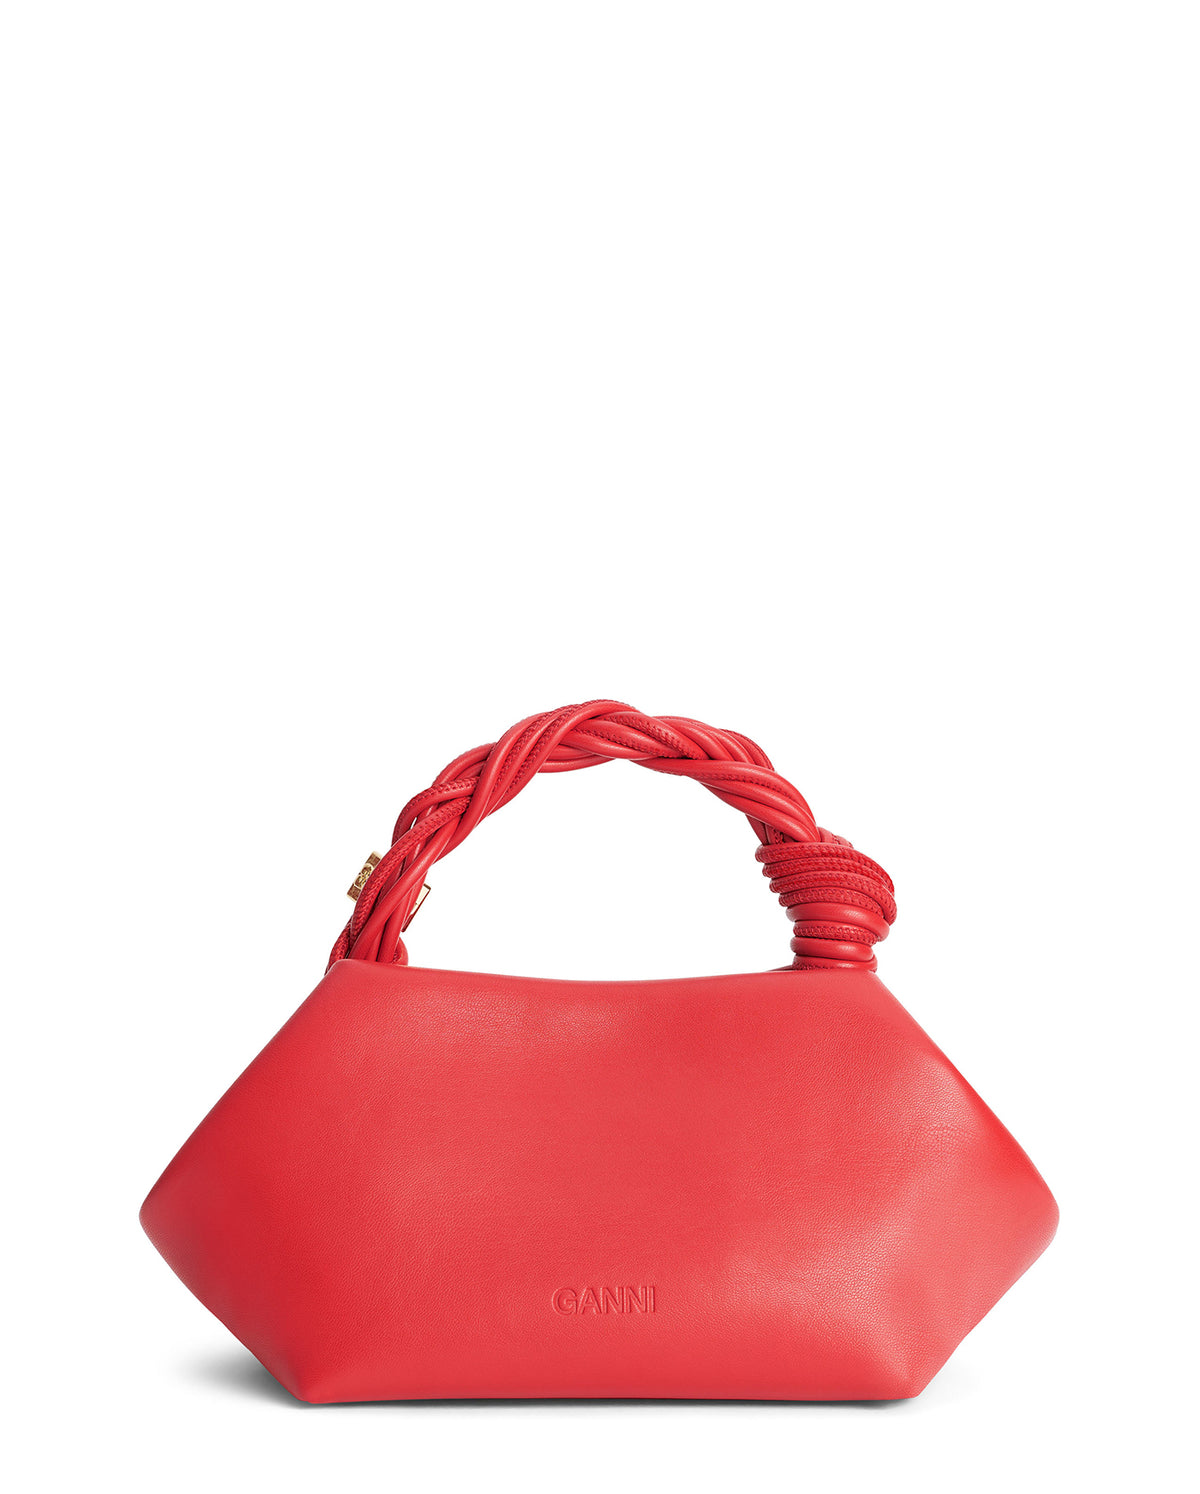 Ganni Bou Bag Small - Fiery Red